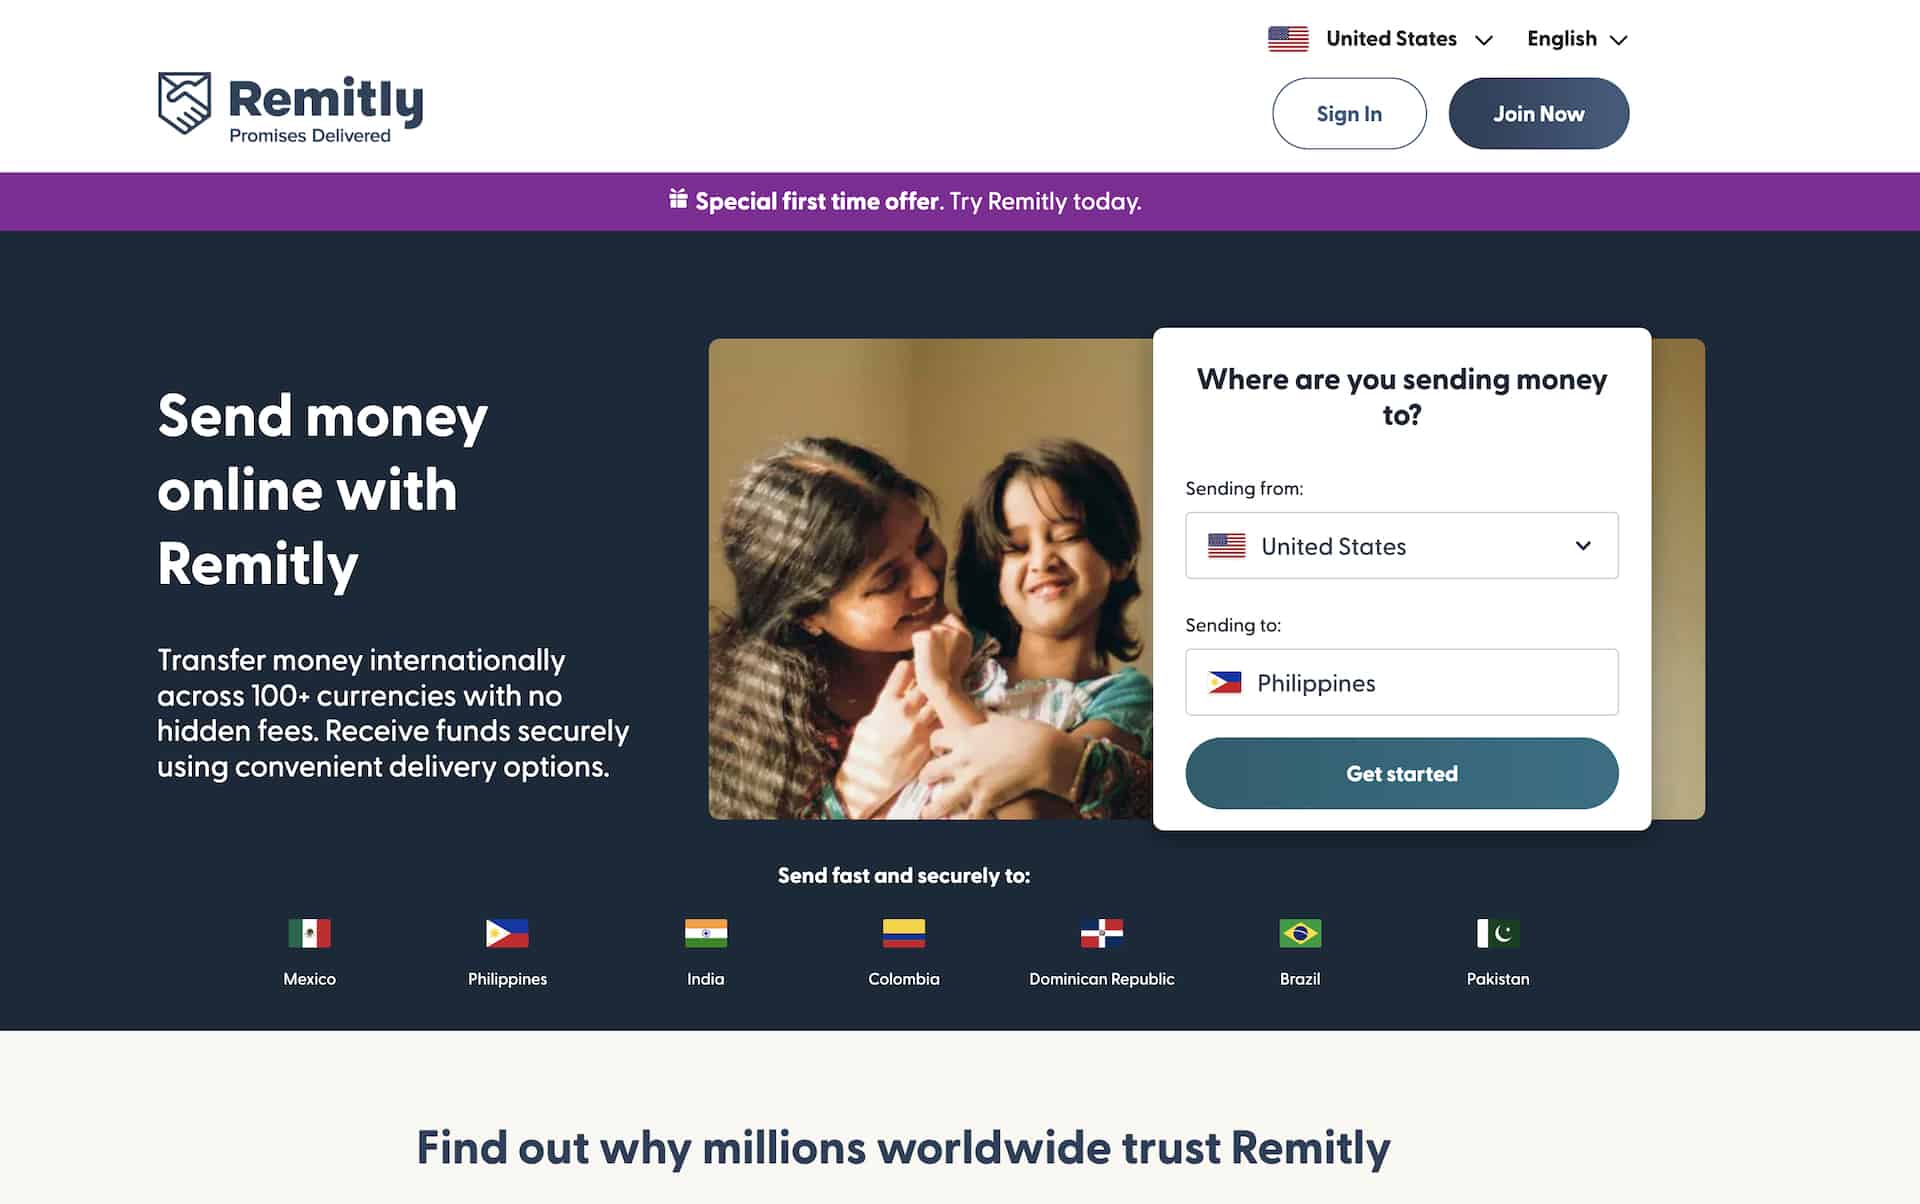 Using the Remitly App to Safely Transfer Money